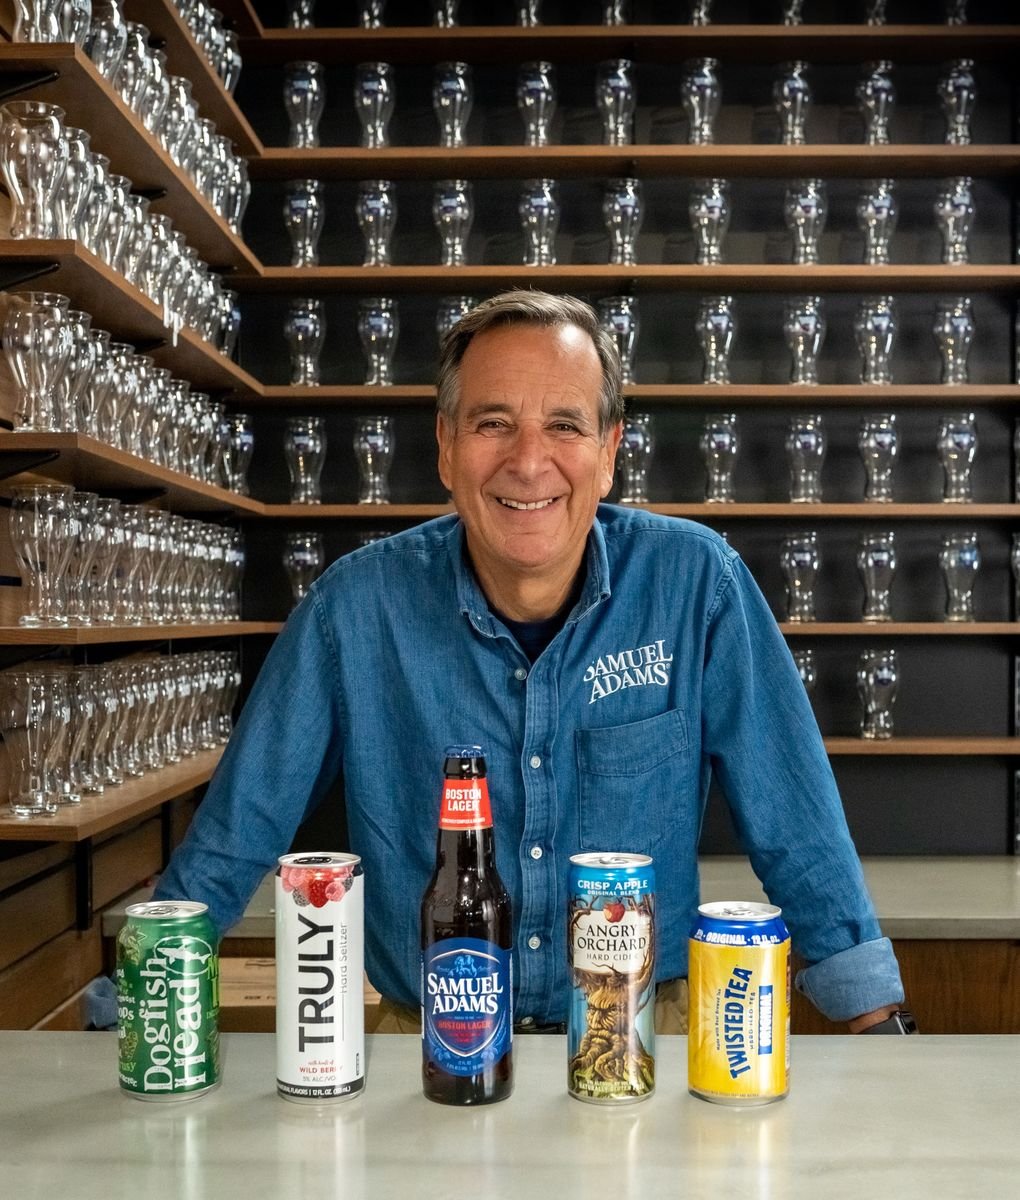 jim koch of the boston beer co. stands behind his brands